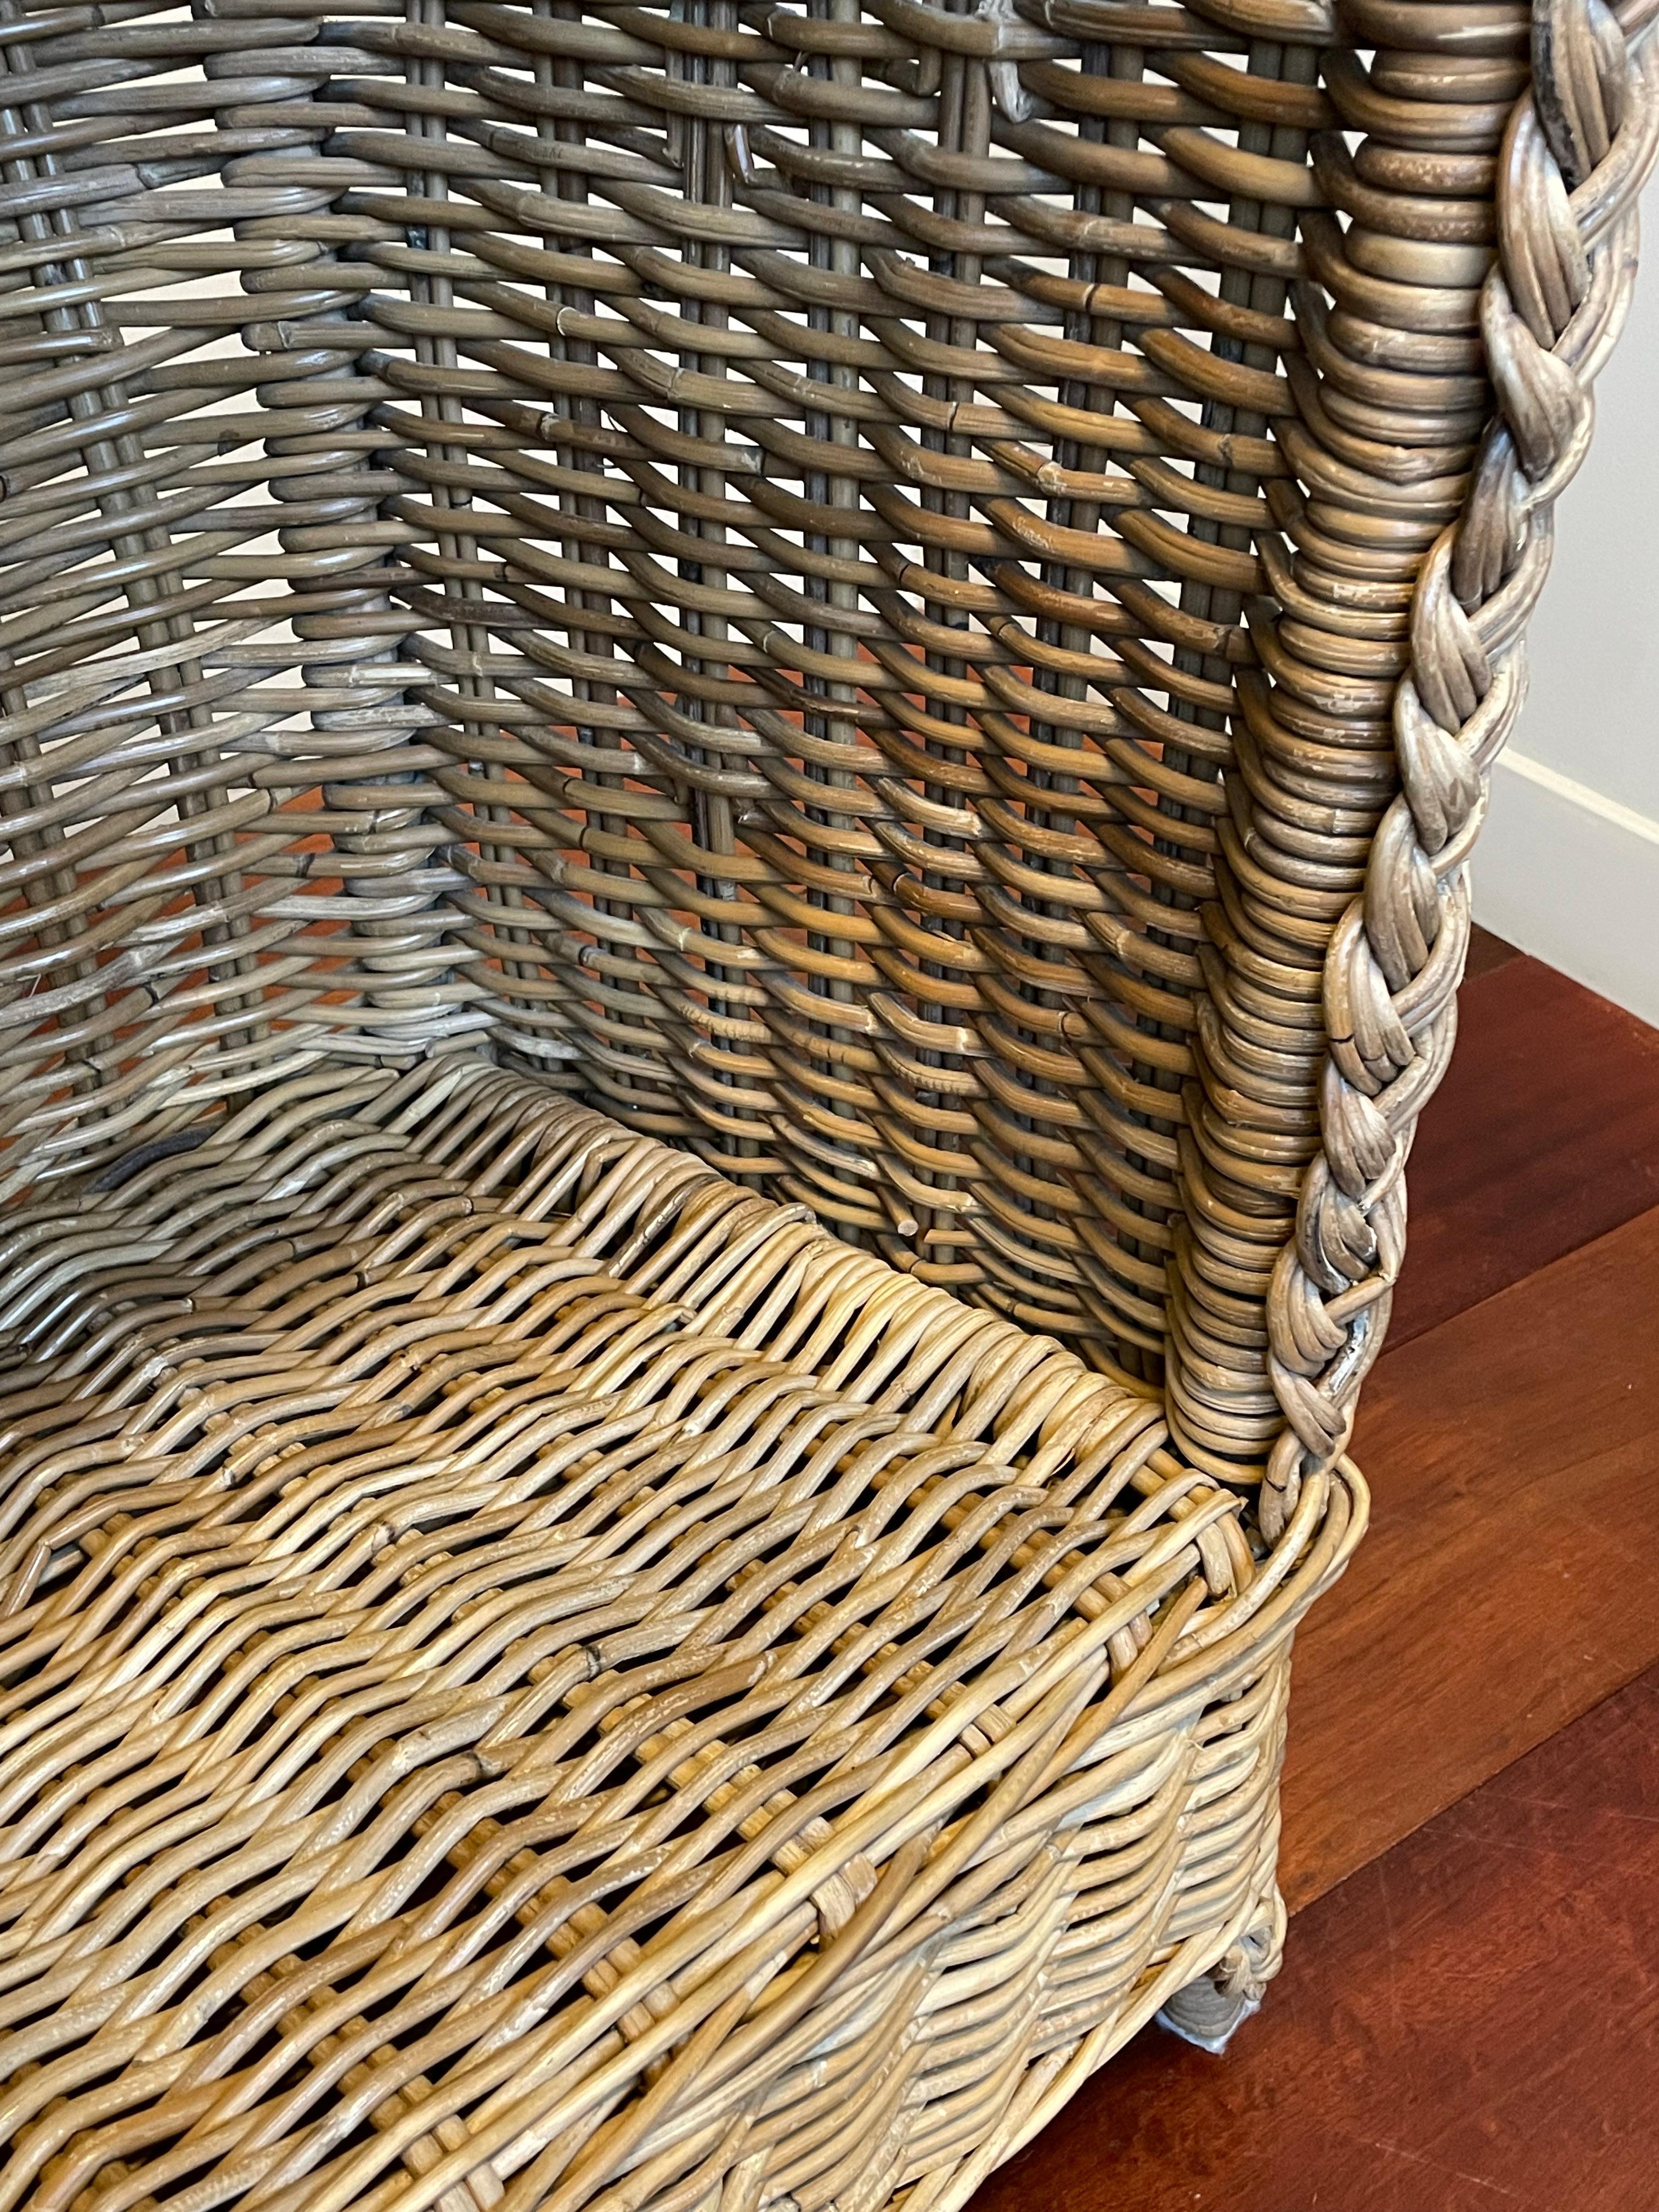 Very Rare & Super Decorative Antique-Like Hand Woven Rattan Beach Chair for Kids For Sale 7